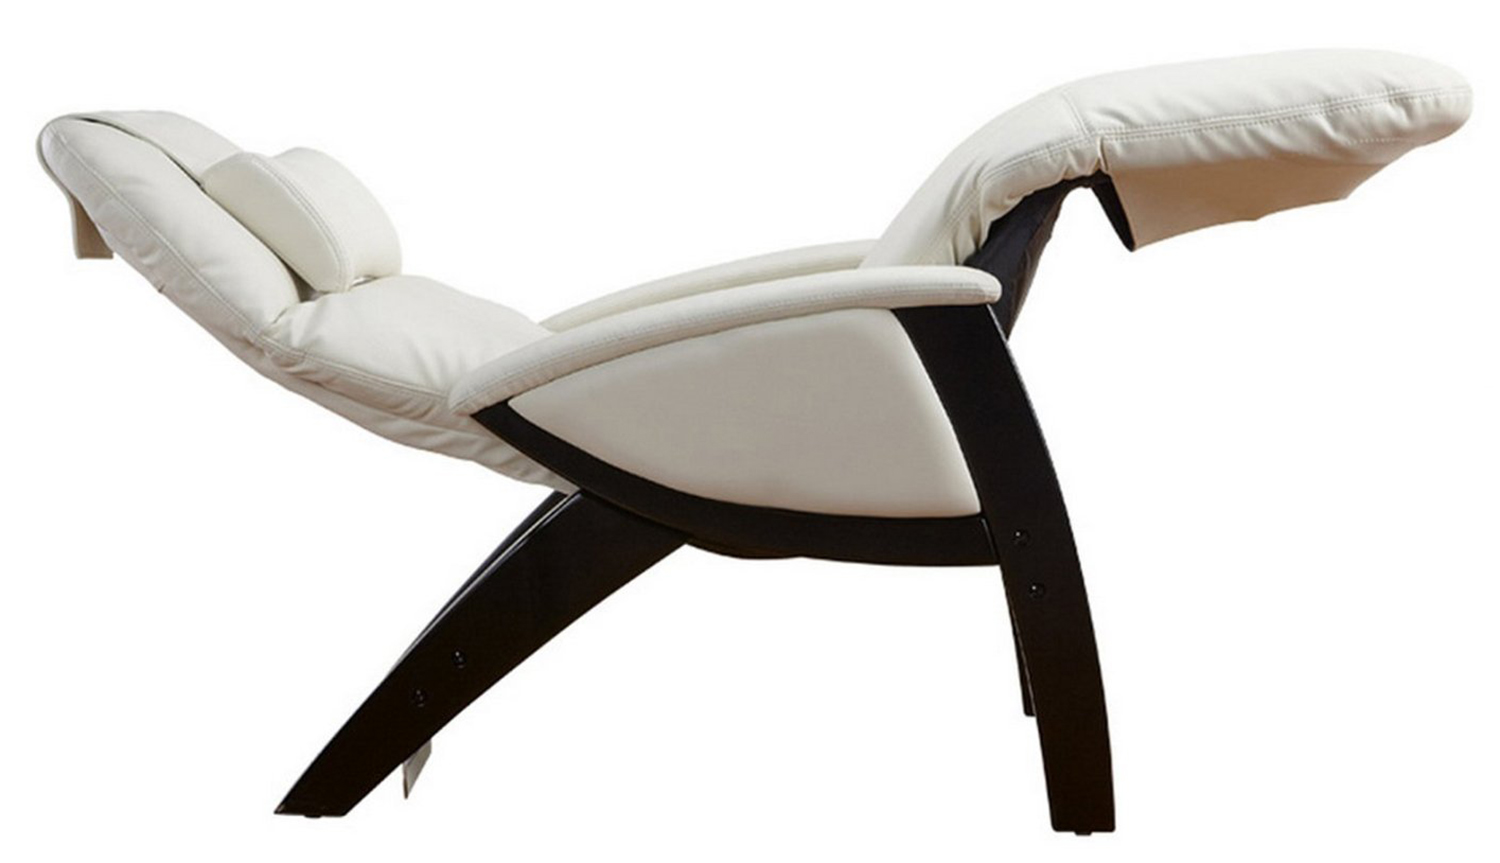 https://vitalityweb.com/backstore/Svago-Recliner-Chair/images/Svago-401-ZG-Recliner-Chair-Ivory-Black-Reclined.jpg